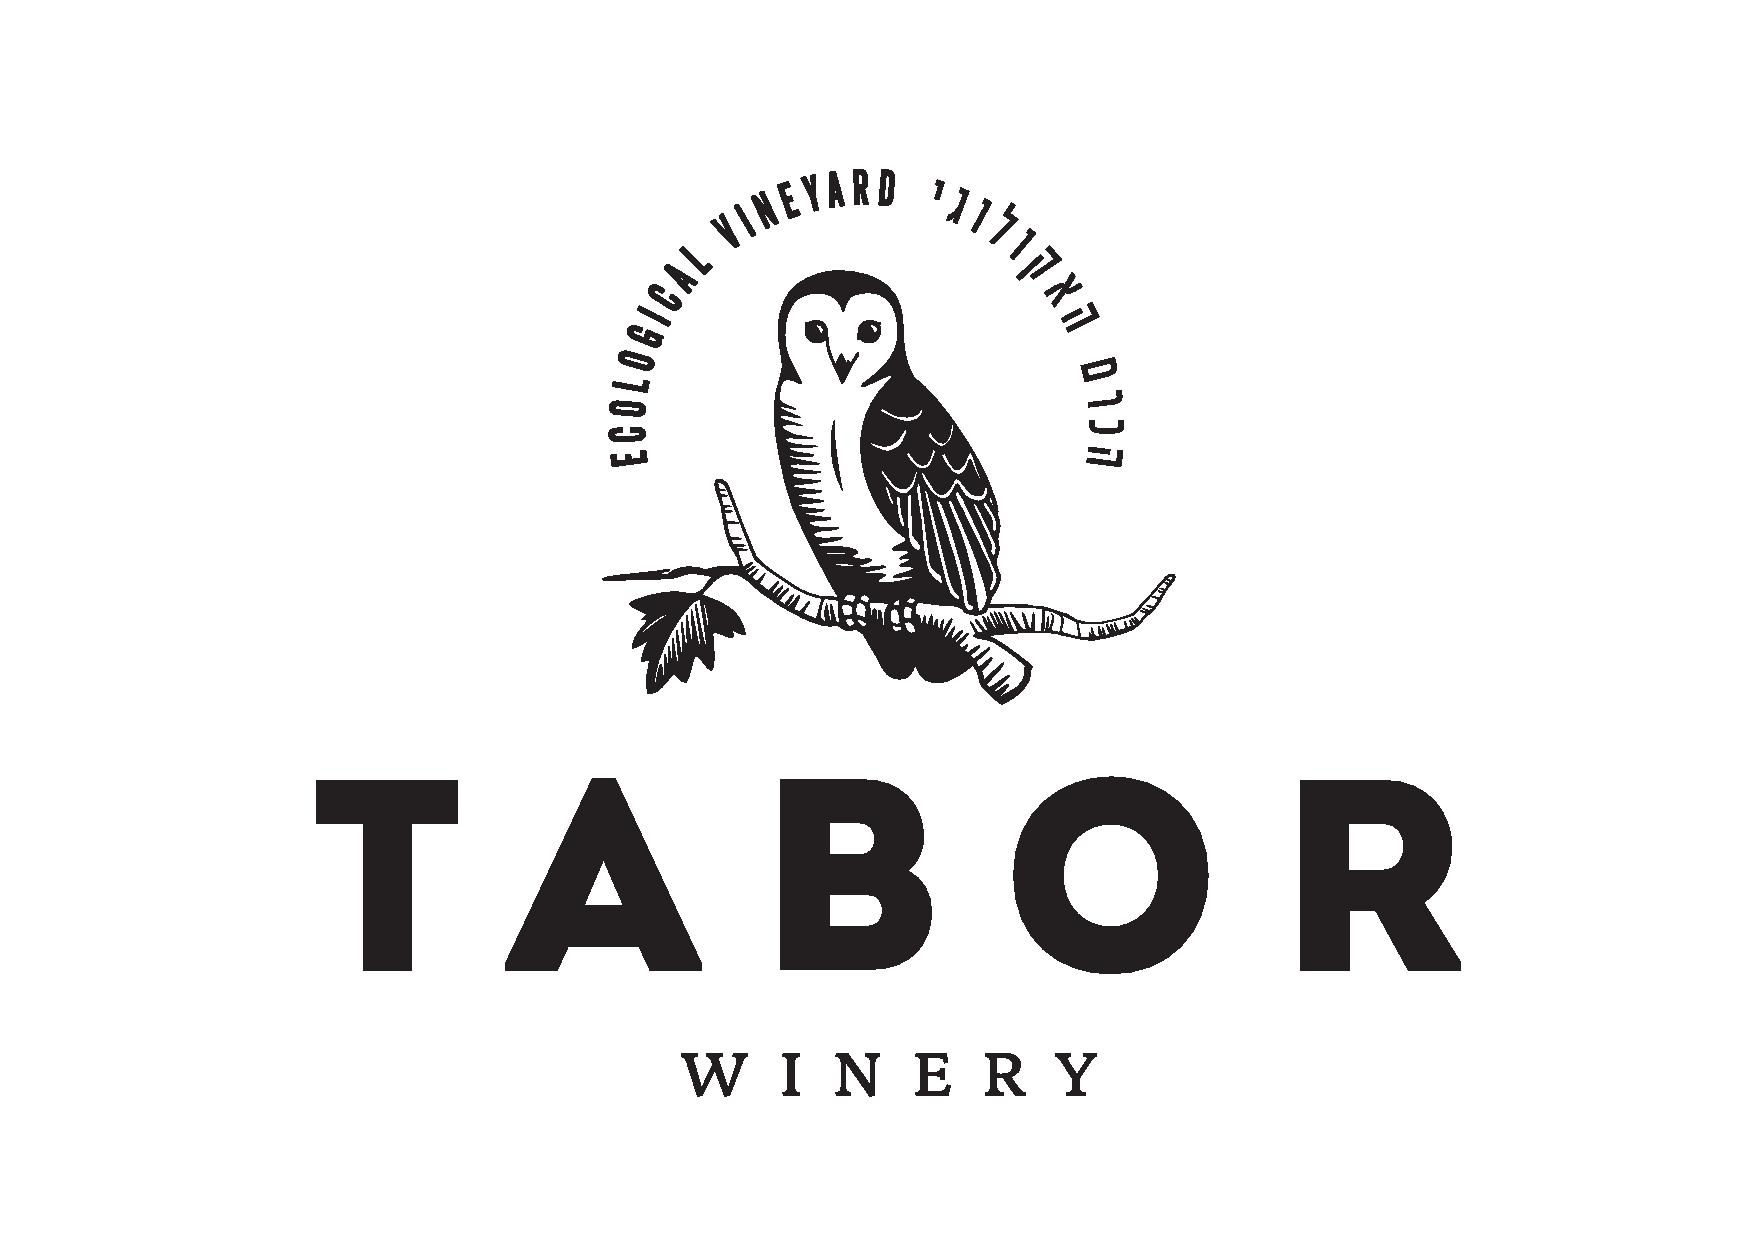 A Visiting Winery-Tabor Winery